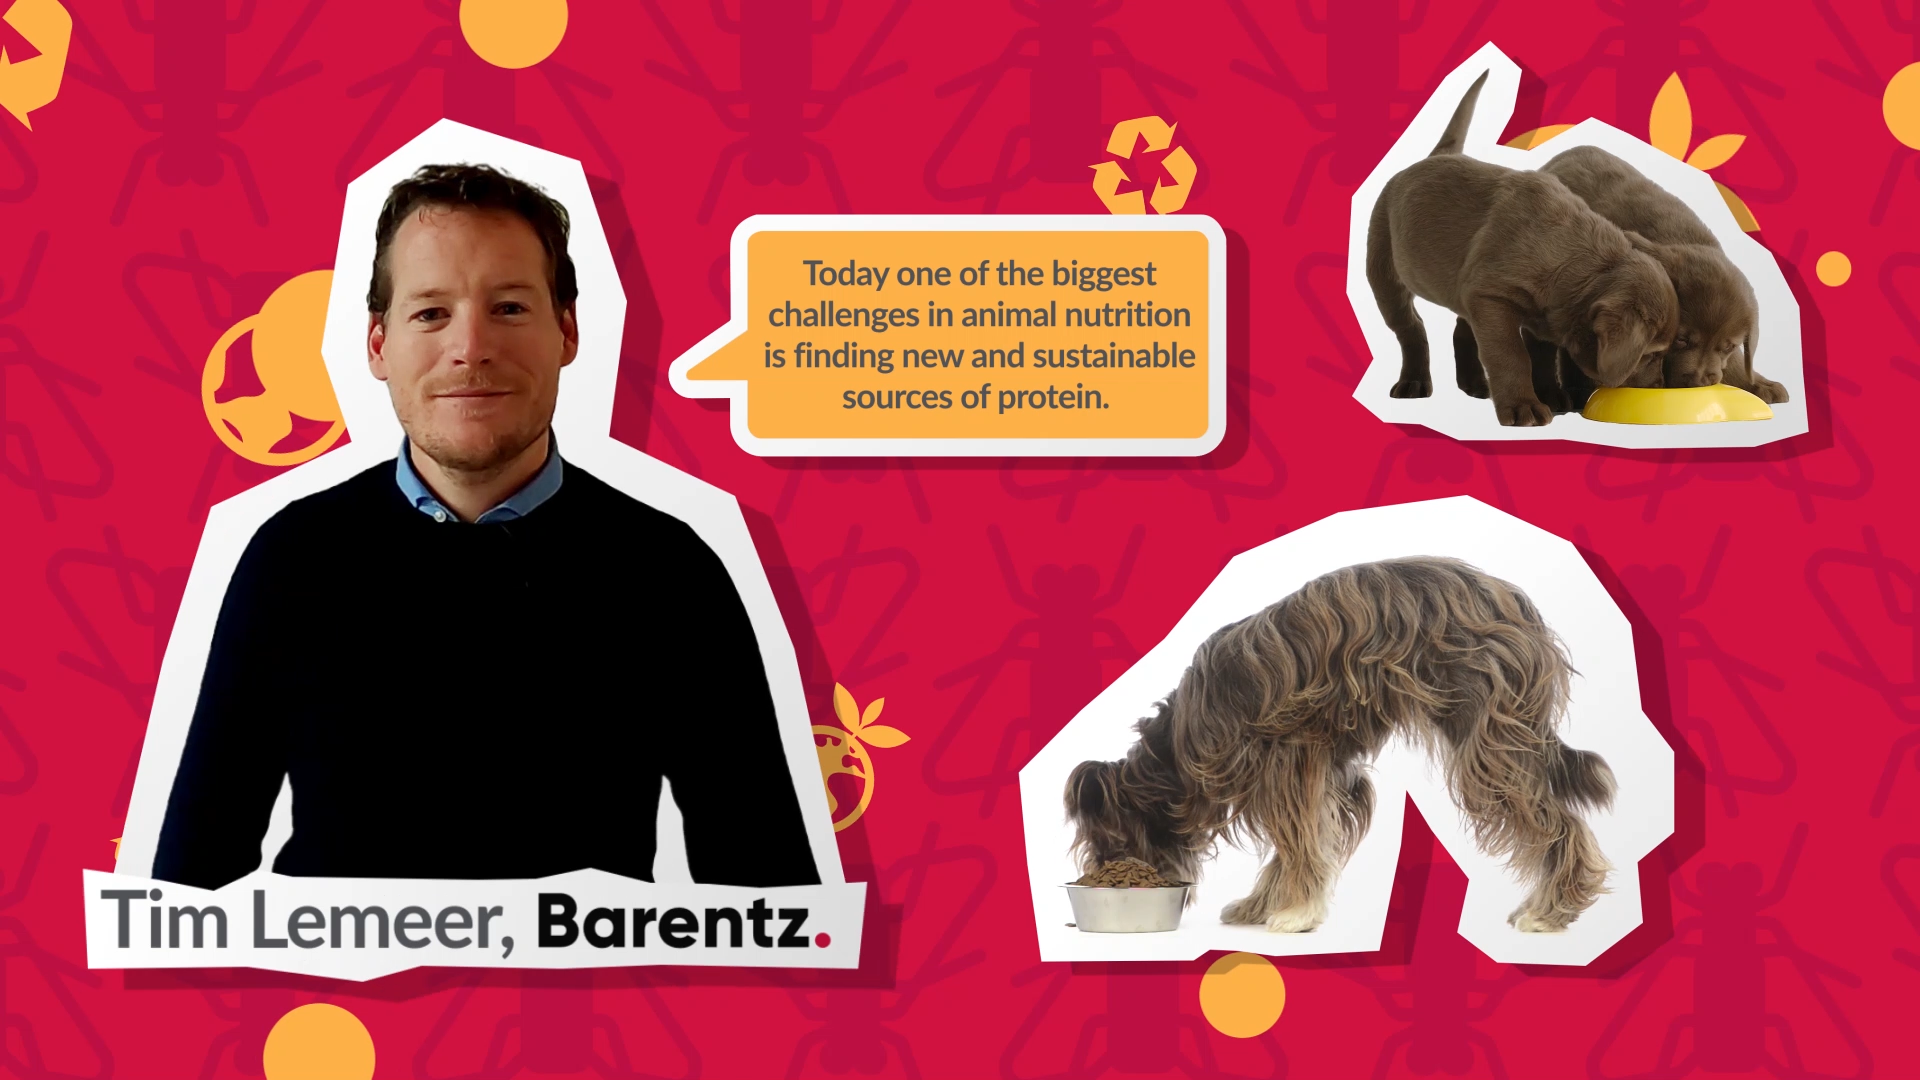 2D Cutout Animation - Tim Lemeer of Barentz explaing the challenges finding sustainable sources of protein for pet food